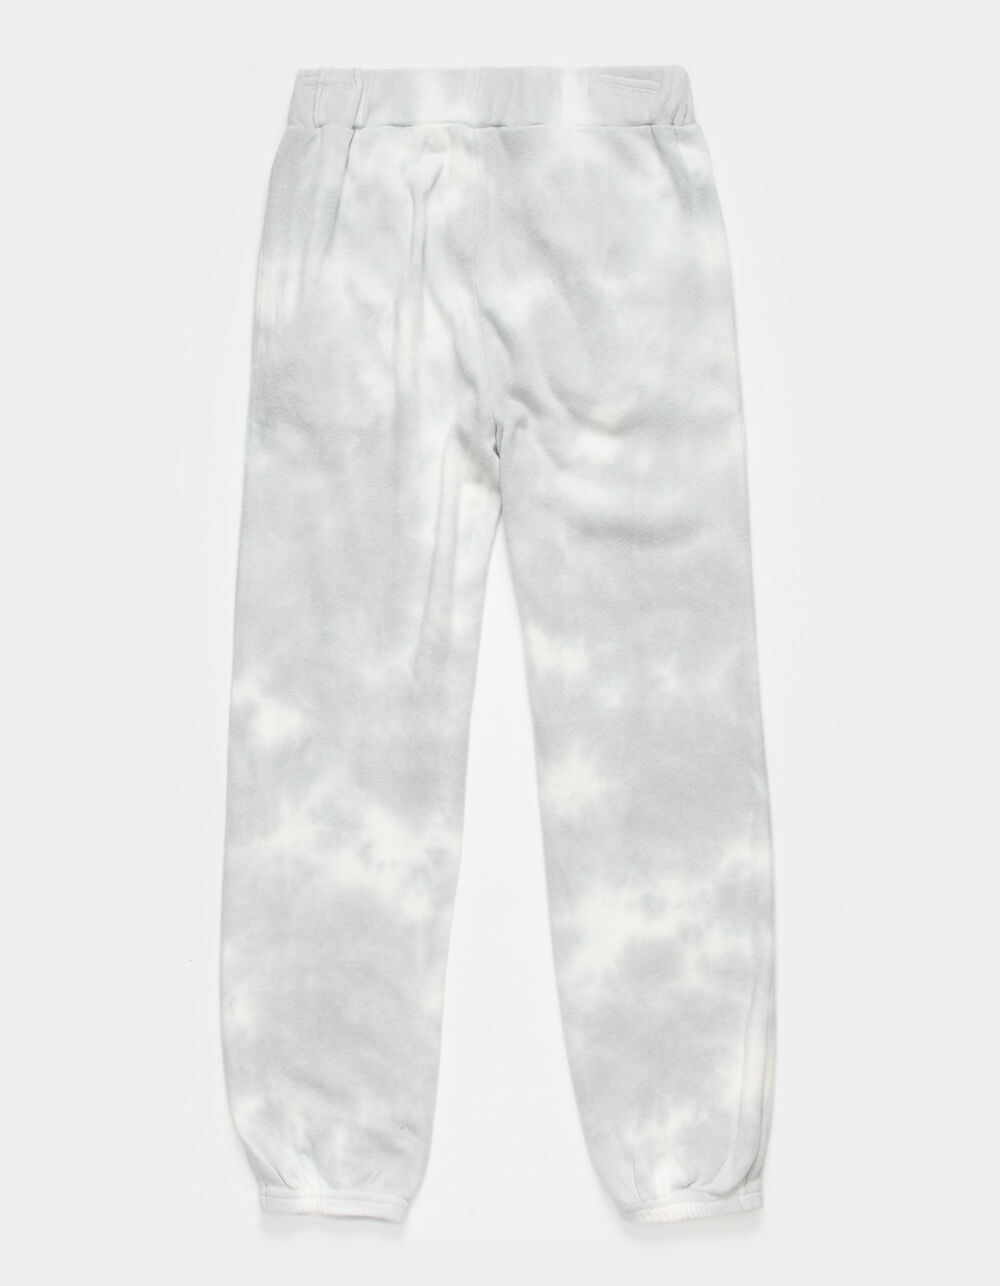 VOLCOM Lived In Lounge Girls Sweatpants - GRAY COMBO | Tillys